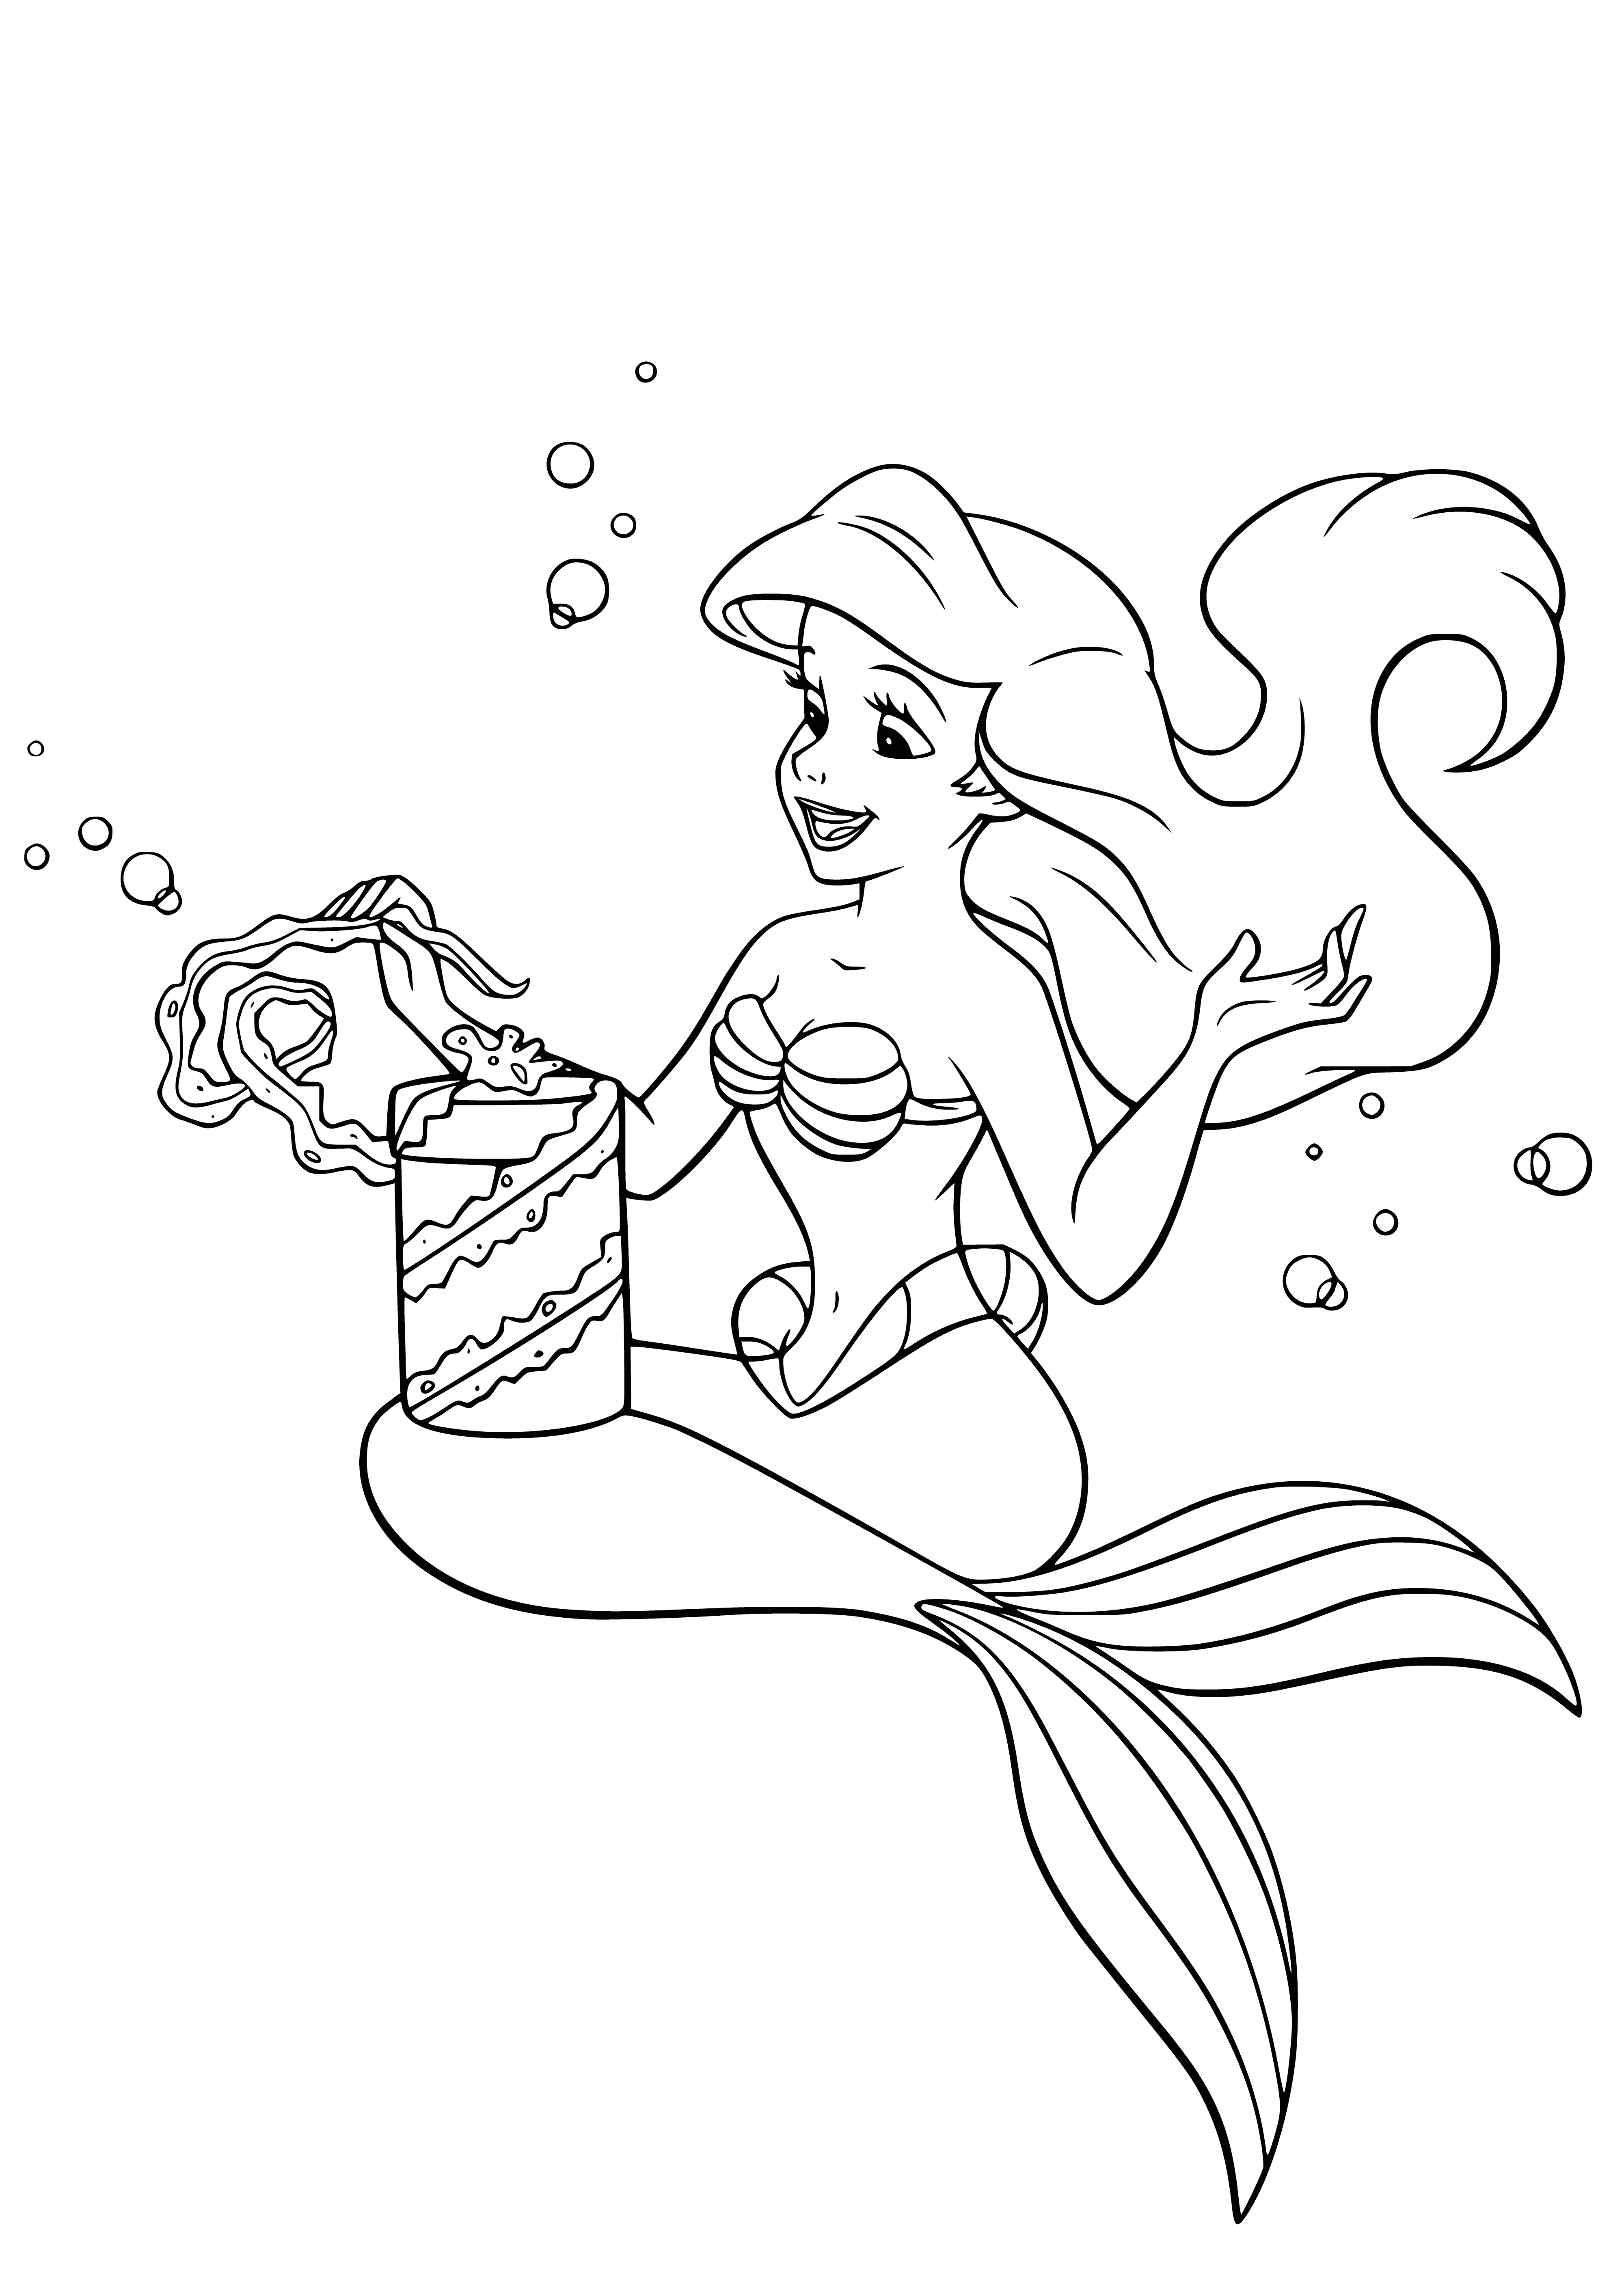 coloring page: Disney princesses celebrate New Year, excited as Ariel admires her seashell necklace gift. They look happy and ready to start 2021!